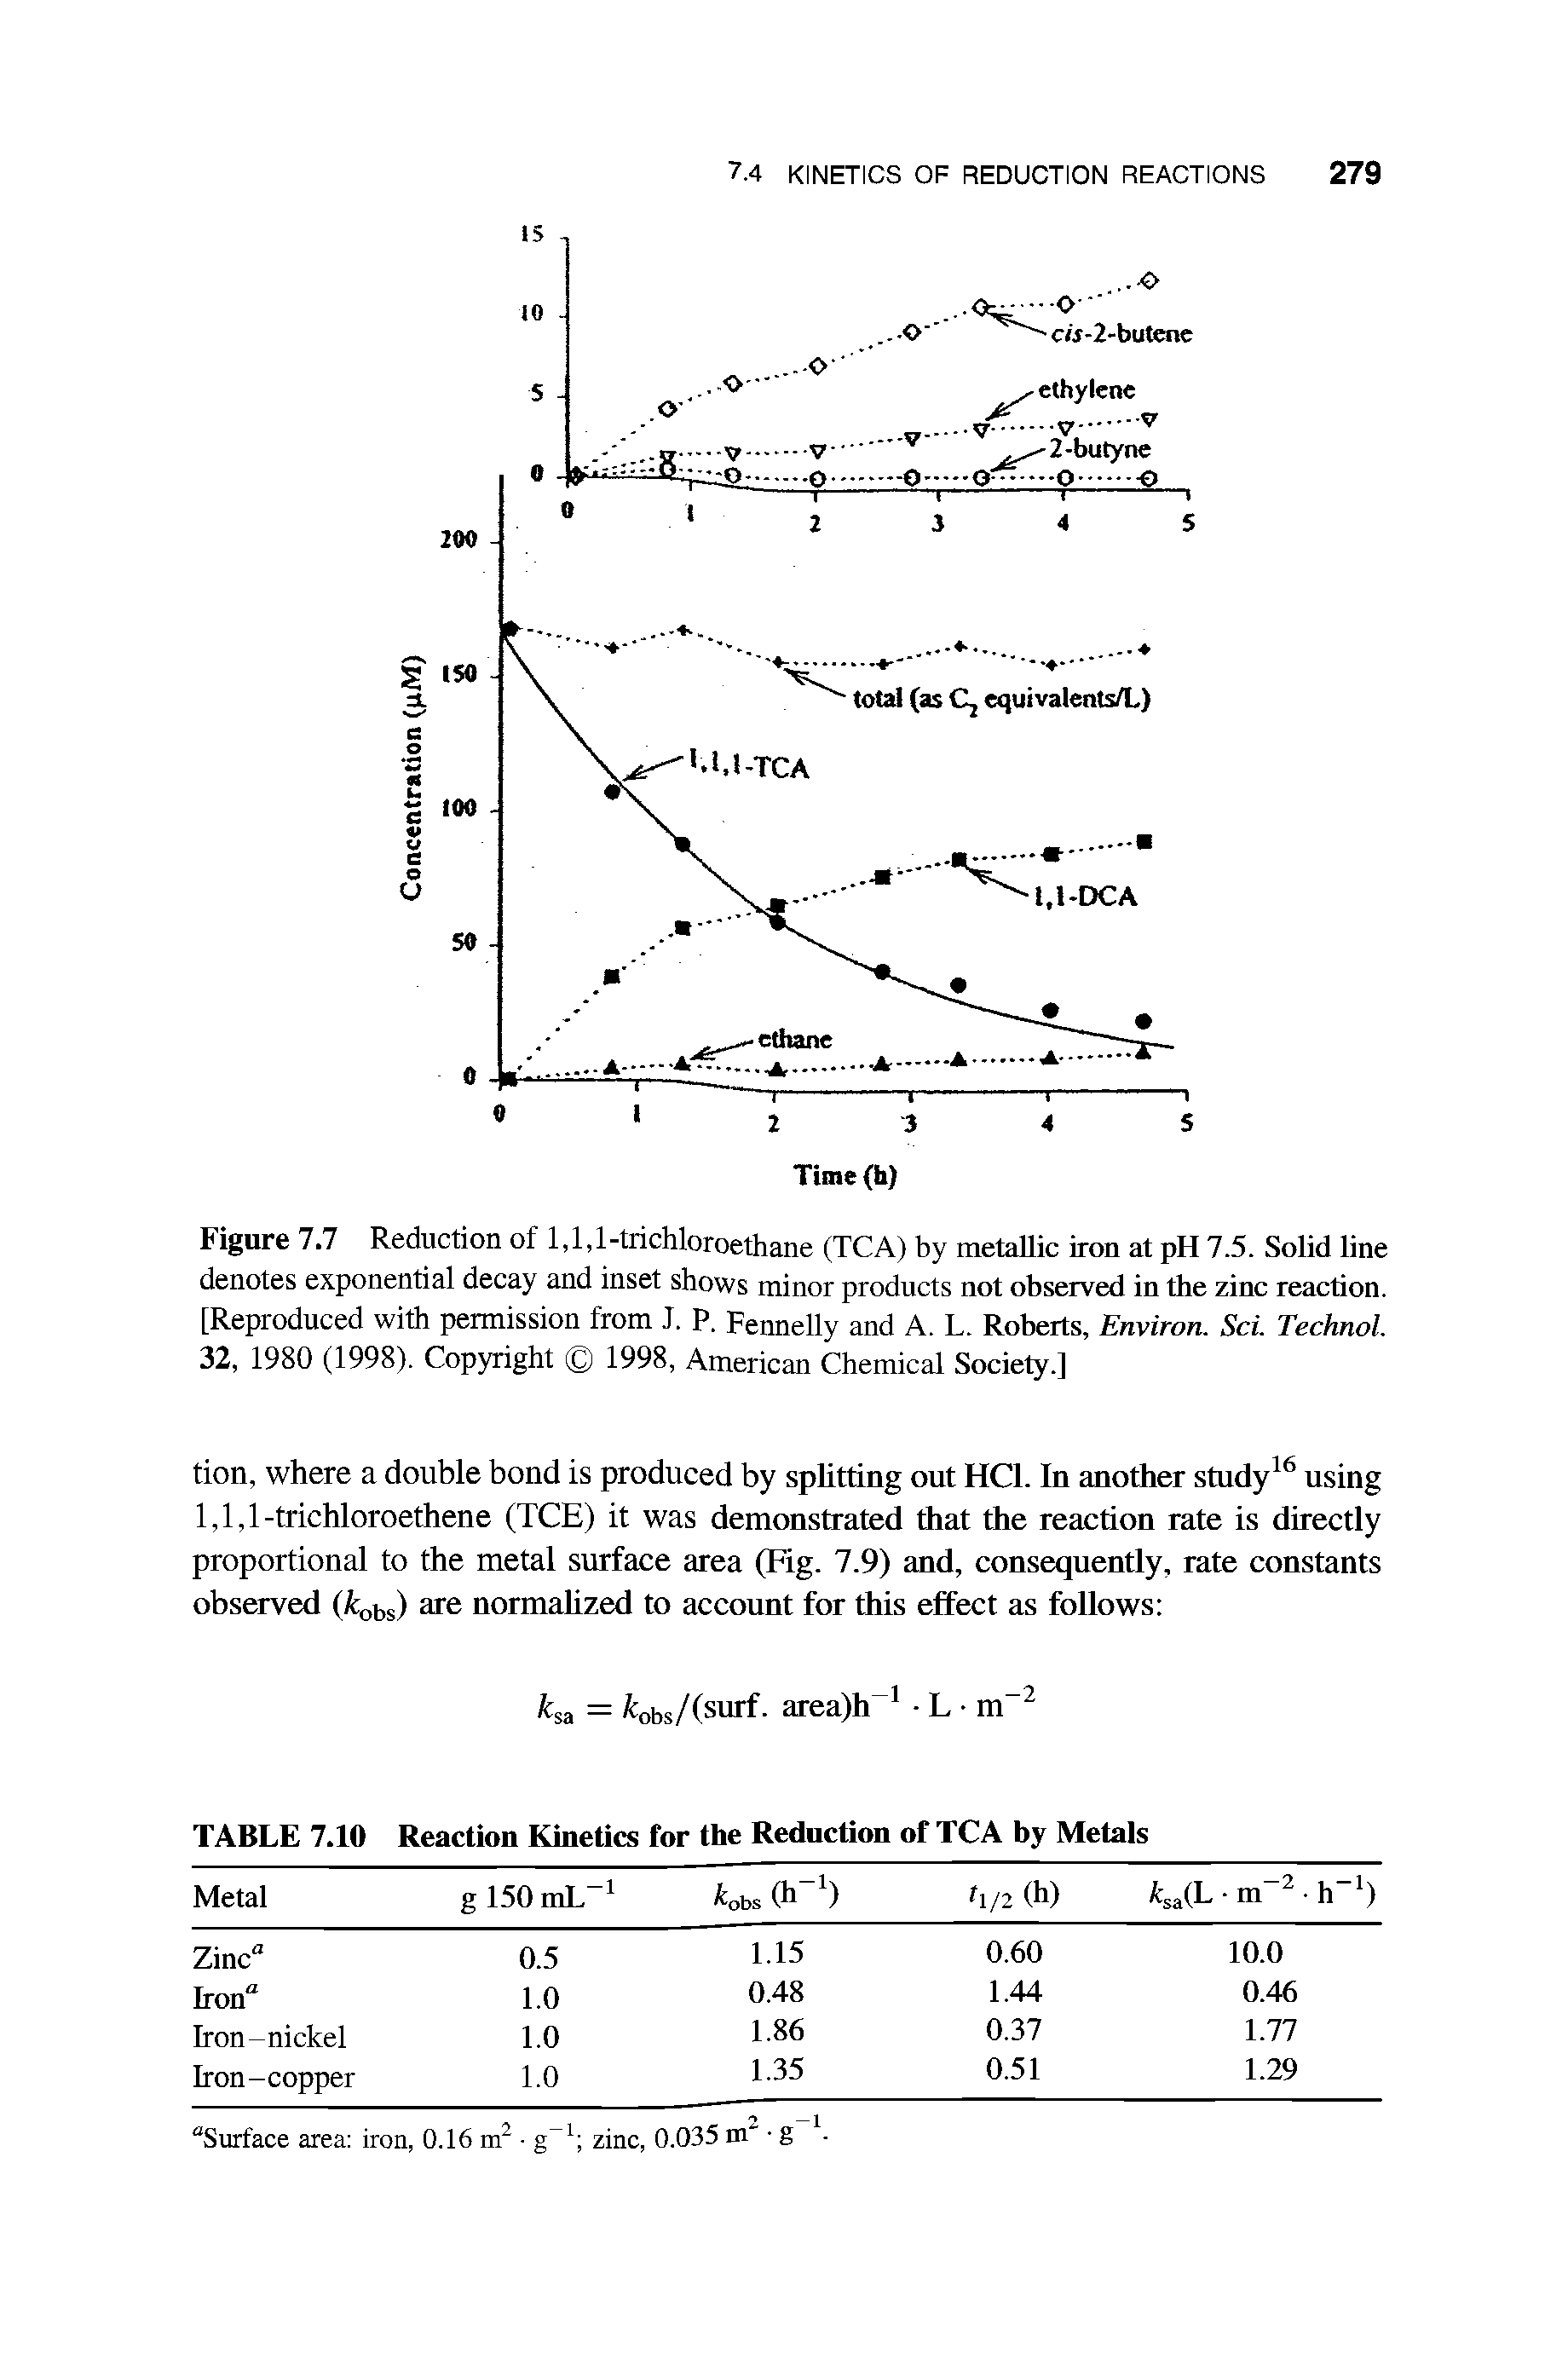 Figure 7.7 Reduction of 1,1,1-trichloroethane (TCA) by metallic iron at pH 7.5. Solid line denotes exponential decay and inset shows minor products not observed in the zinc reaction. [Reproduced with permission from J. P. Fennelly and A. L. Roberts, Environ. Set Technol. 32, 1980 (1998). Copyright 1998, American Chemical Society.]...